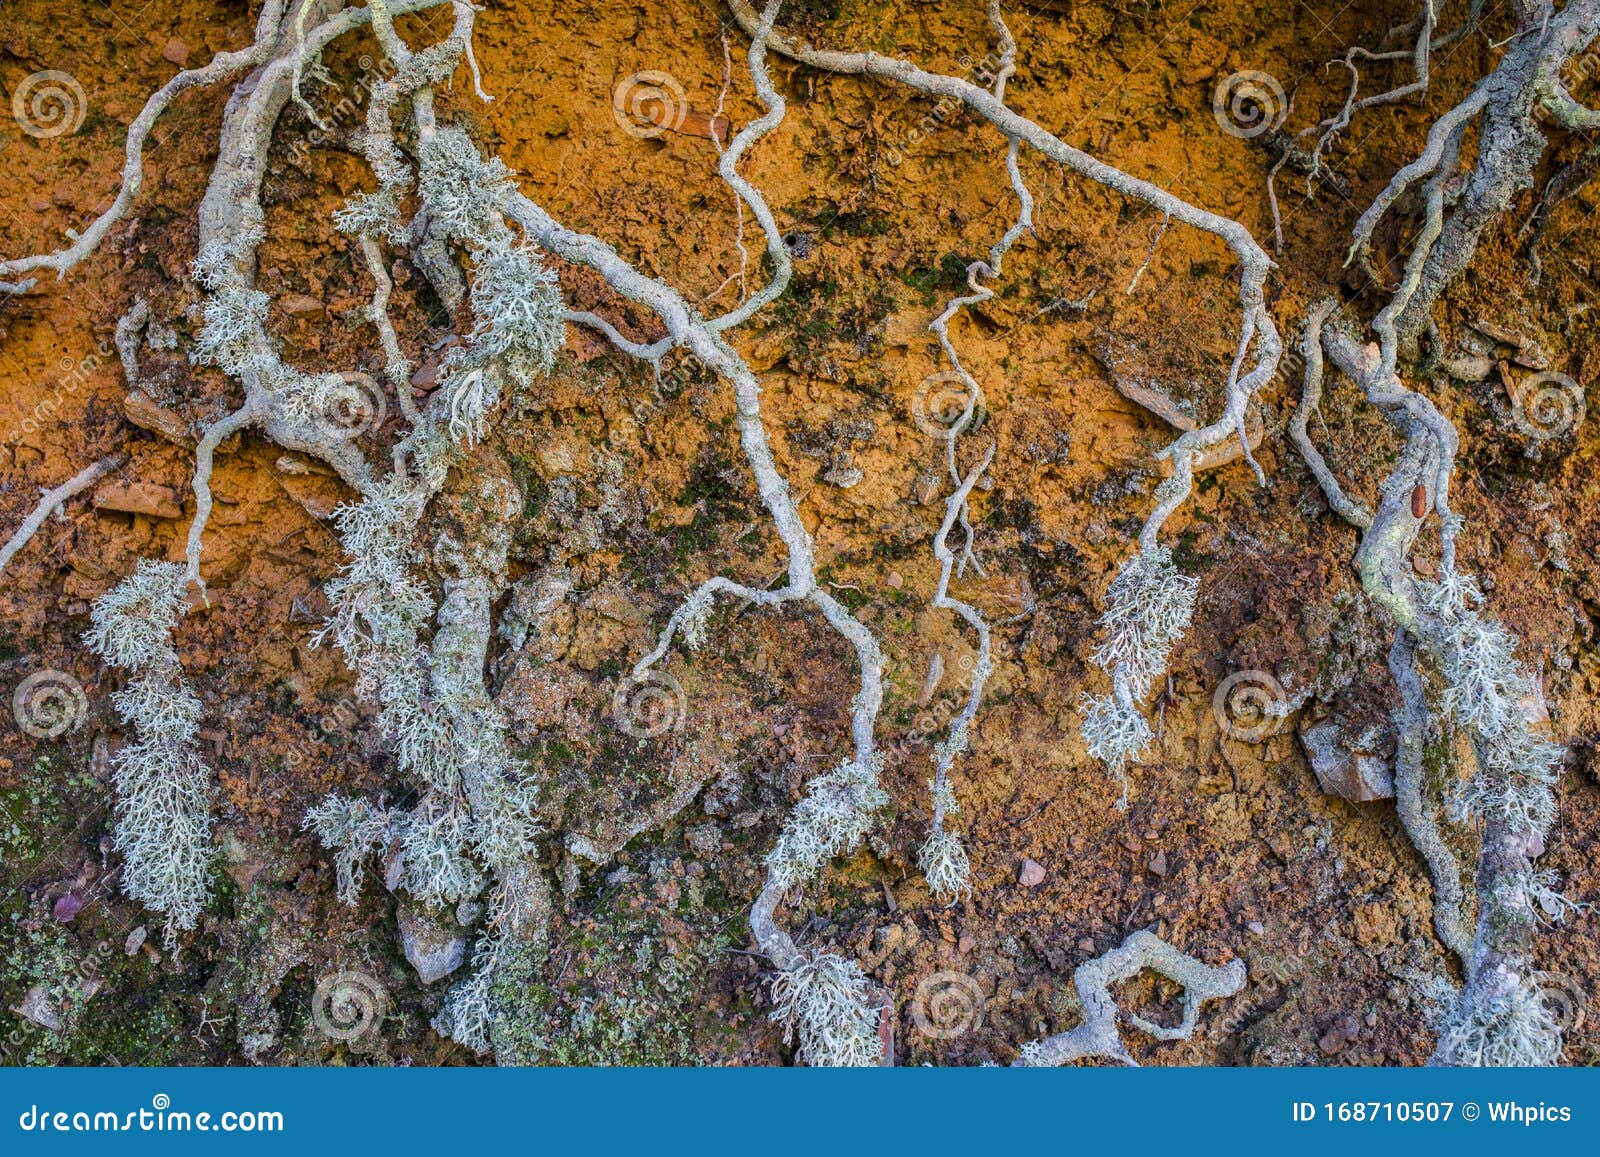 exposed roots covered with lichens al along the hiking trail